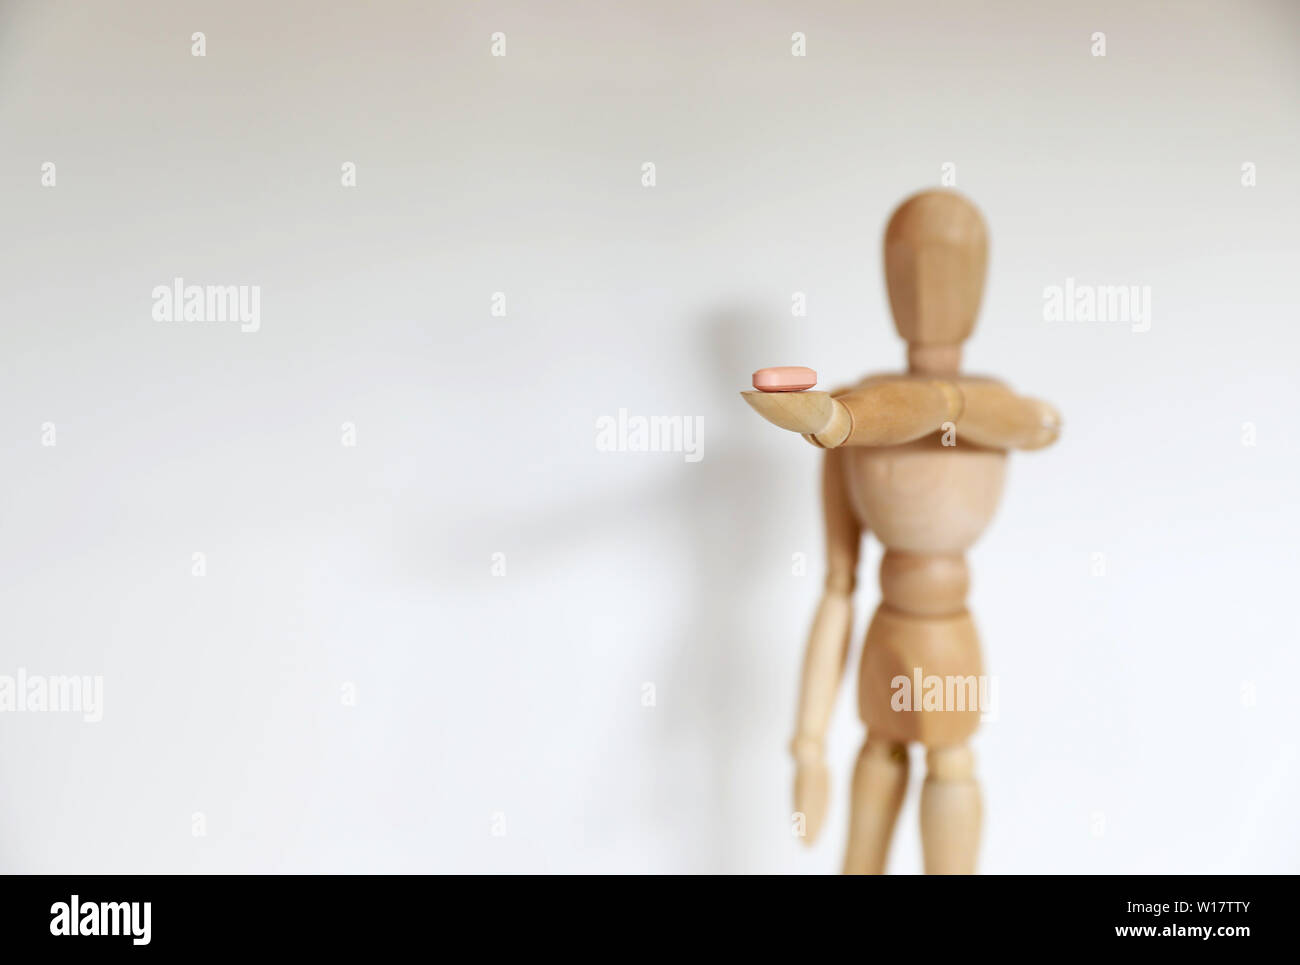 Single solo individual wooden mannequin figure offering dealing a pill drug to the viewer. Personal choice decision. Self harm damage and consequence Stock Photo